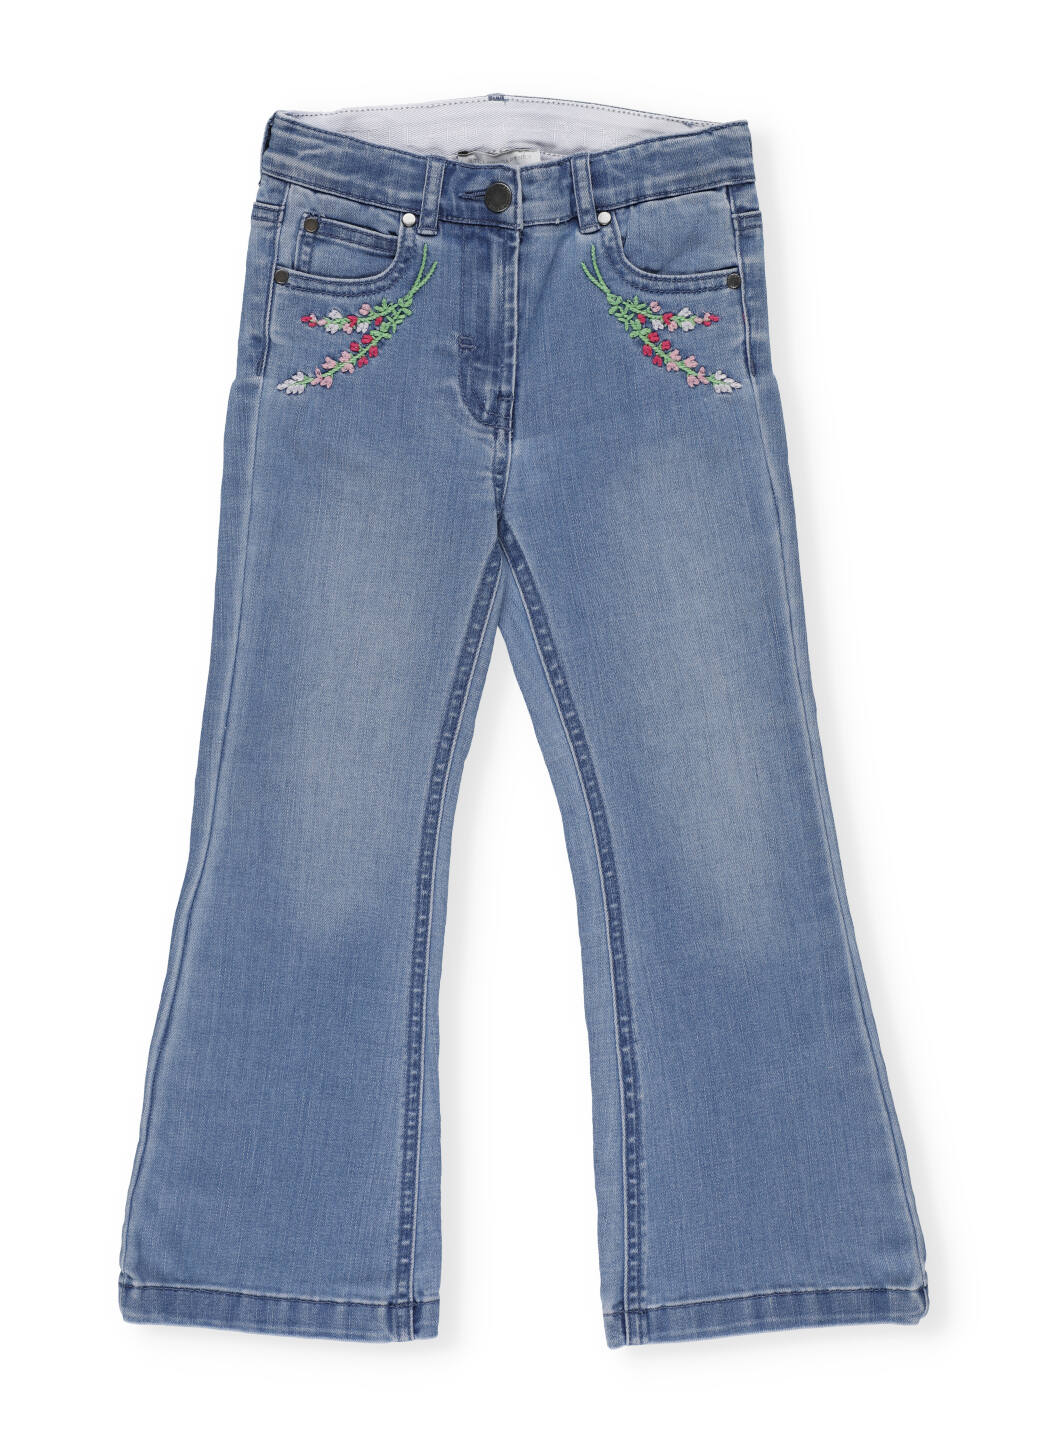 Stella McCartney Denim Jeans With Embroidered Flowers